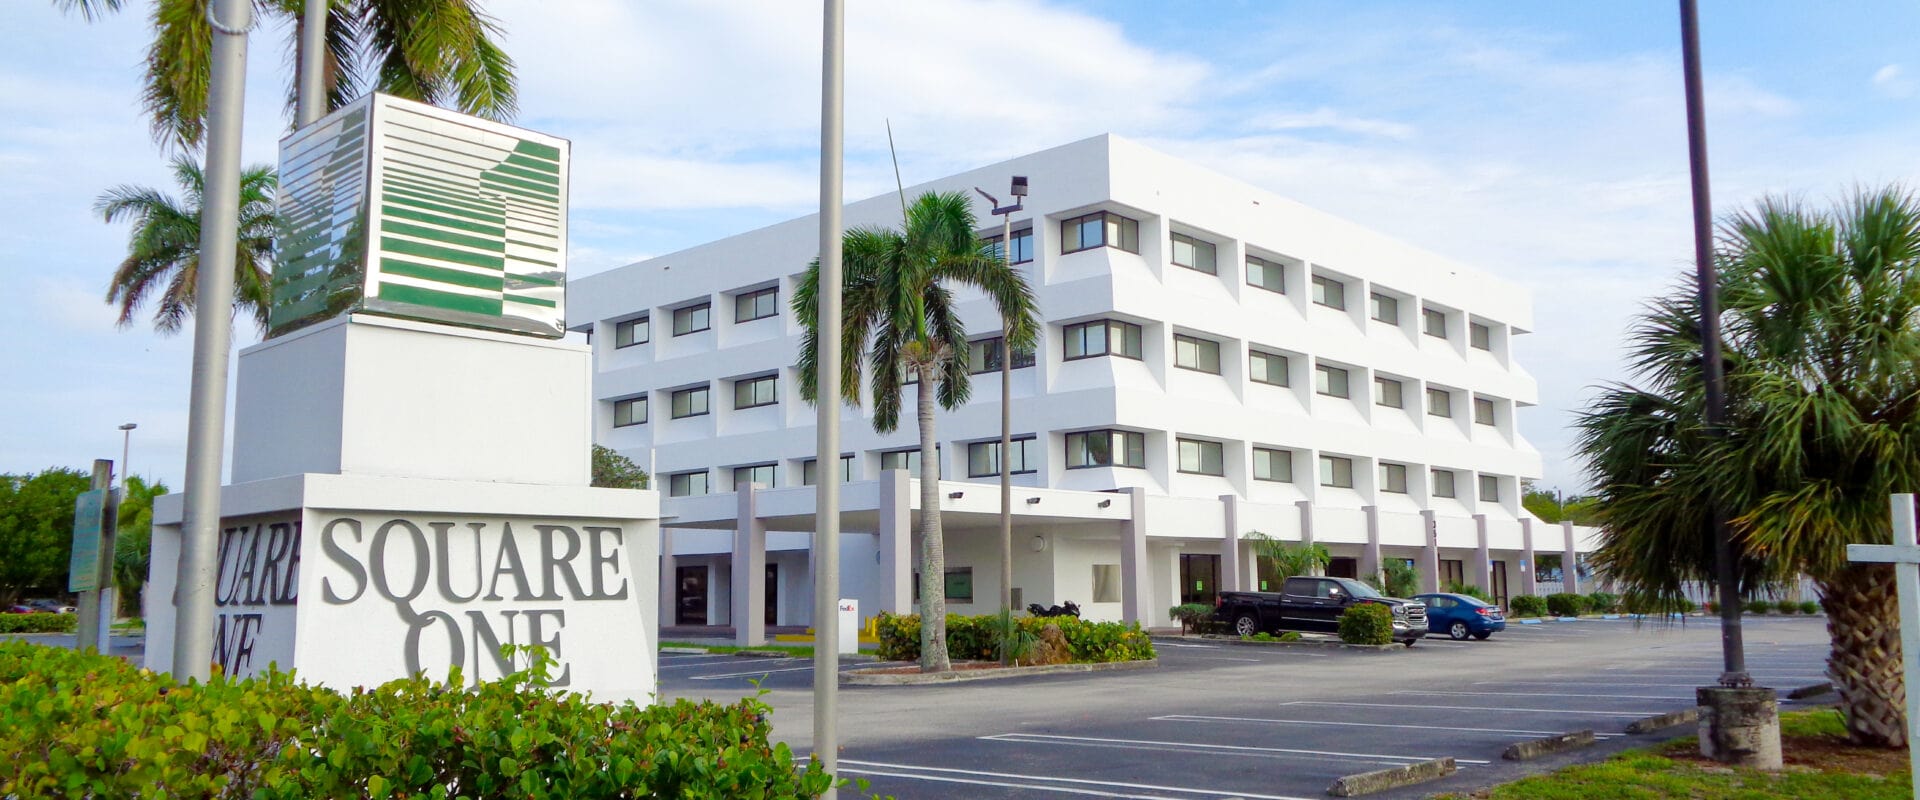 For Lease Office Space Pompano Beach 264 SF